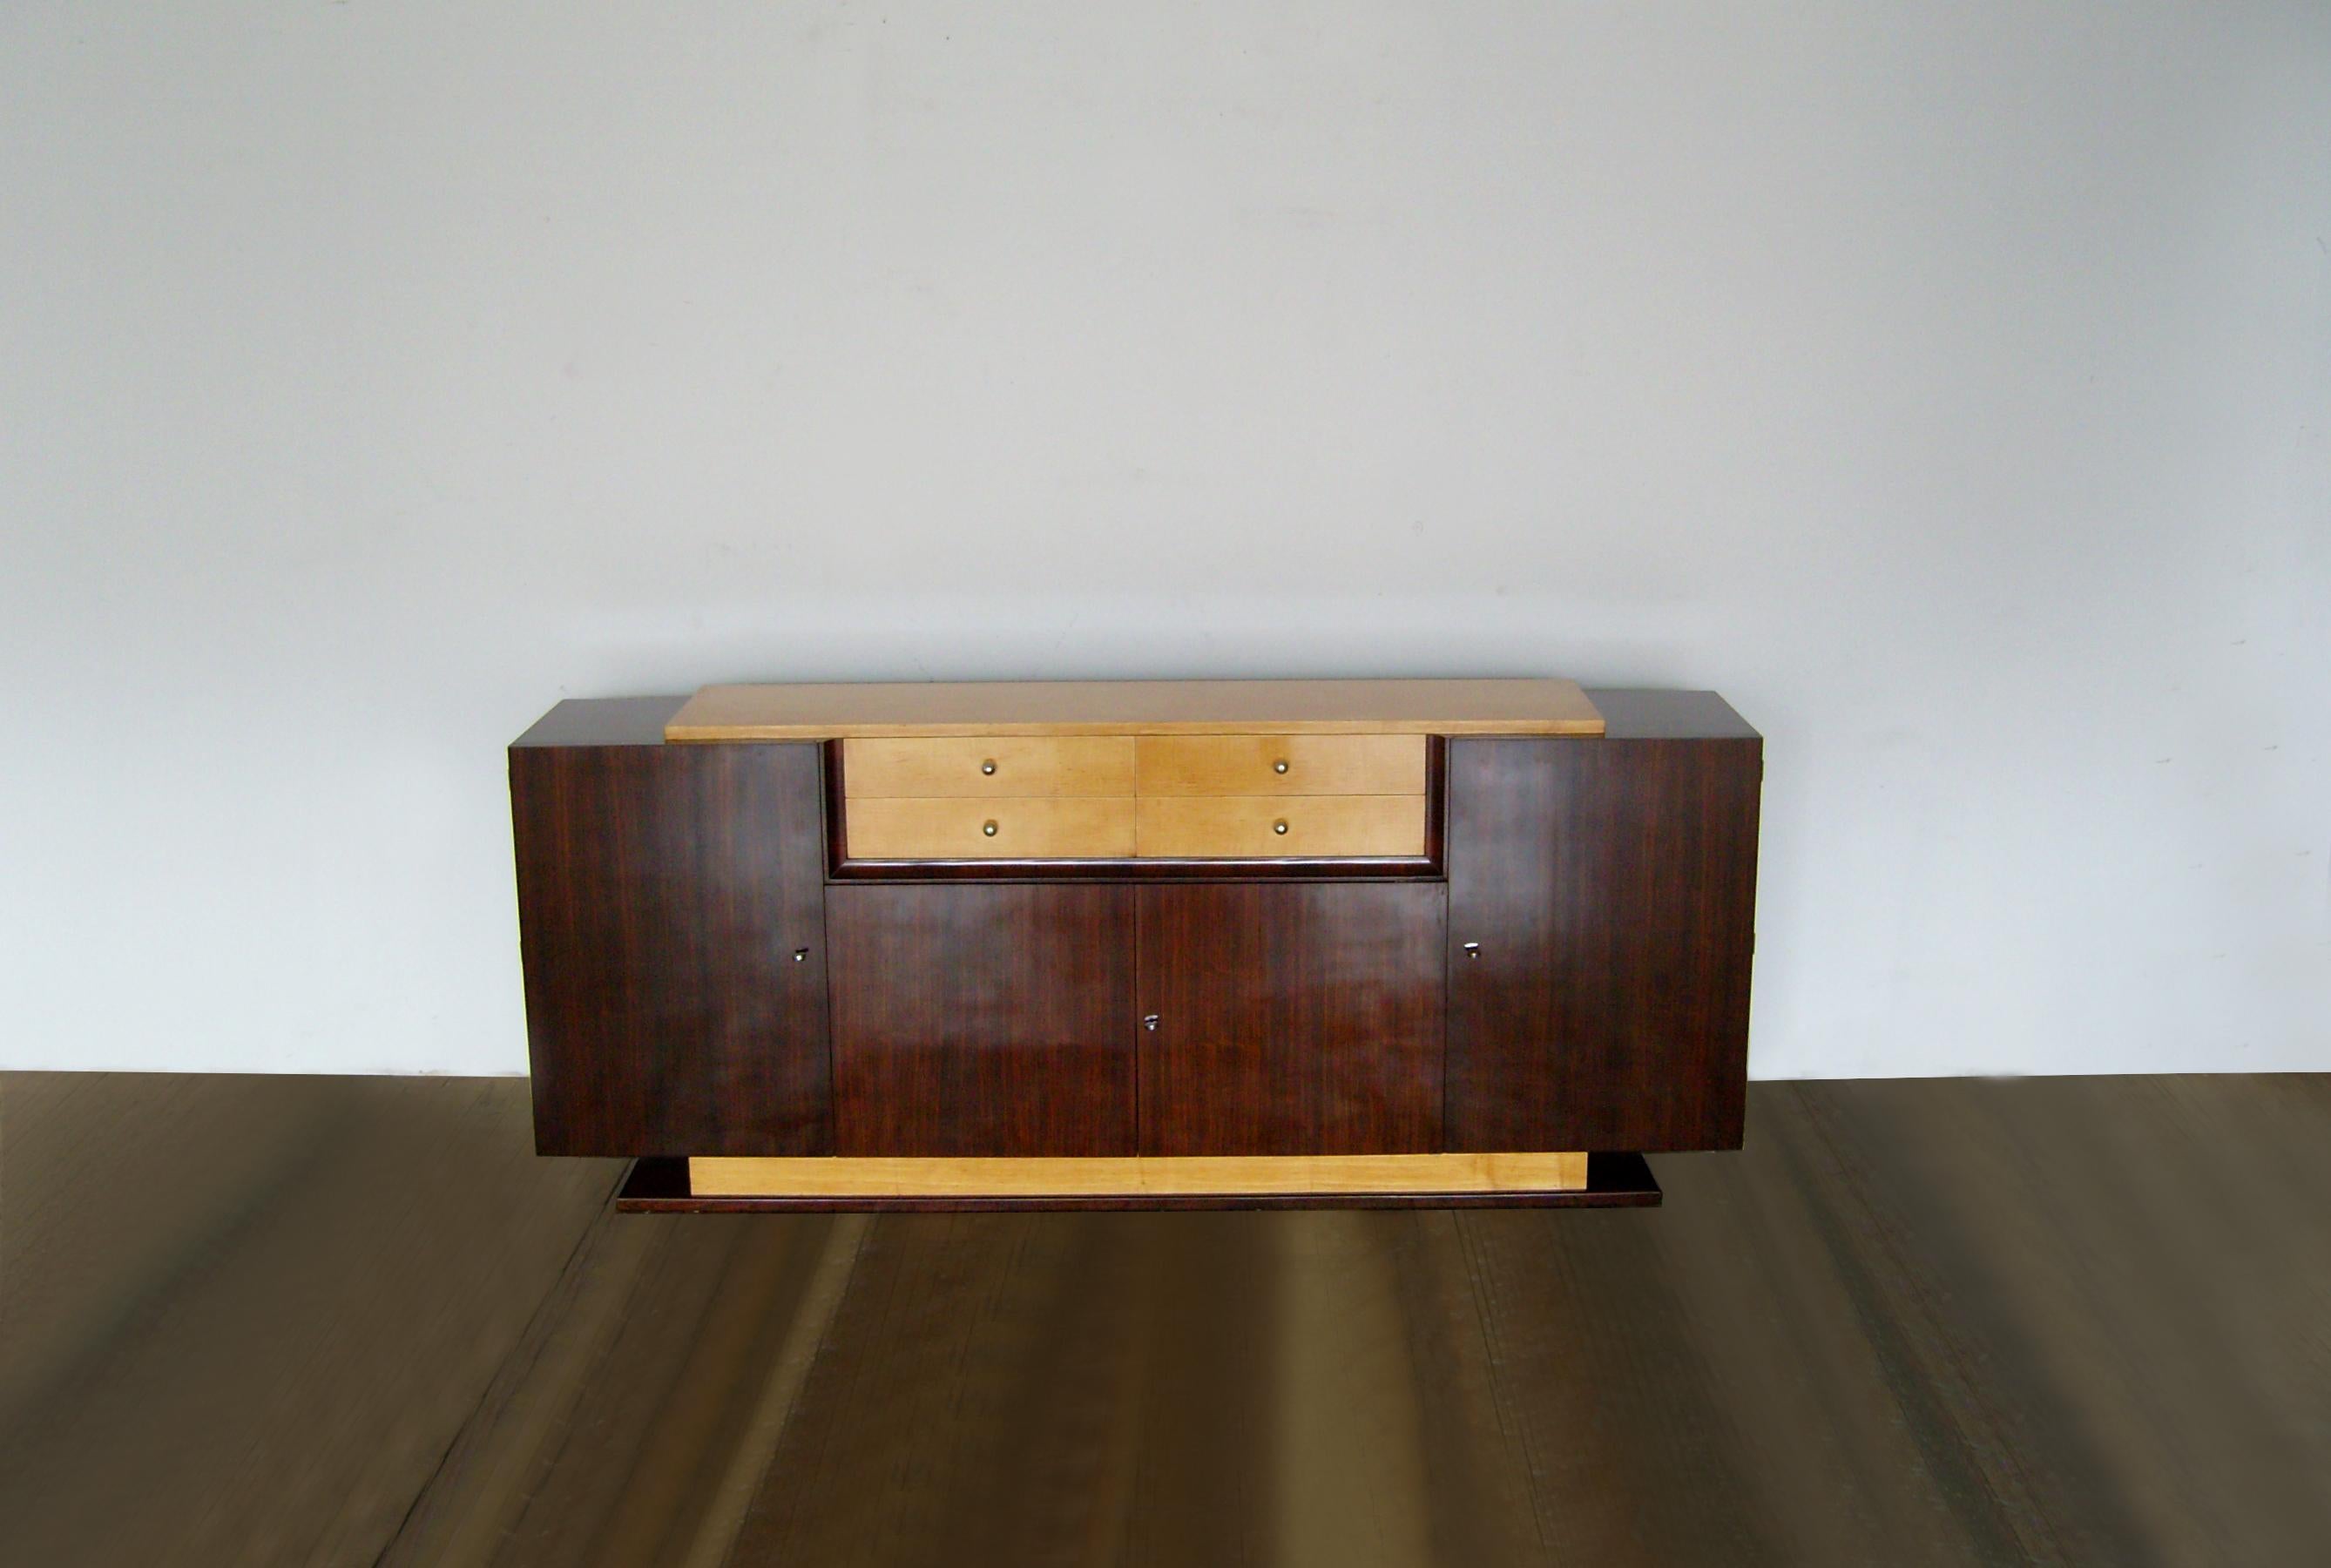 Belgian A Fine Art Deco Rosewood and Sycamore Sideboard by De Coene